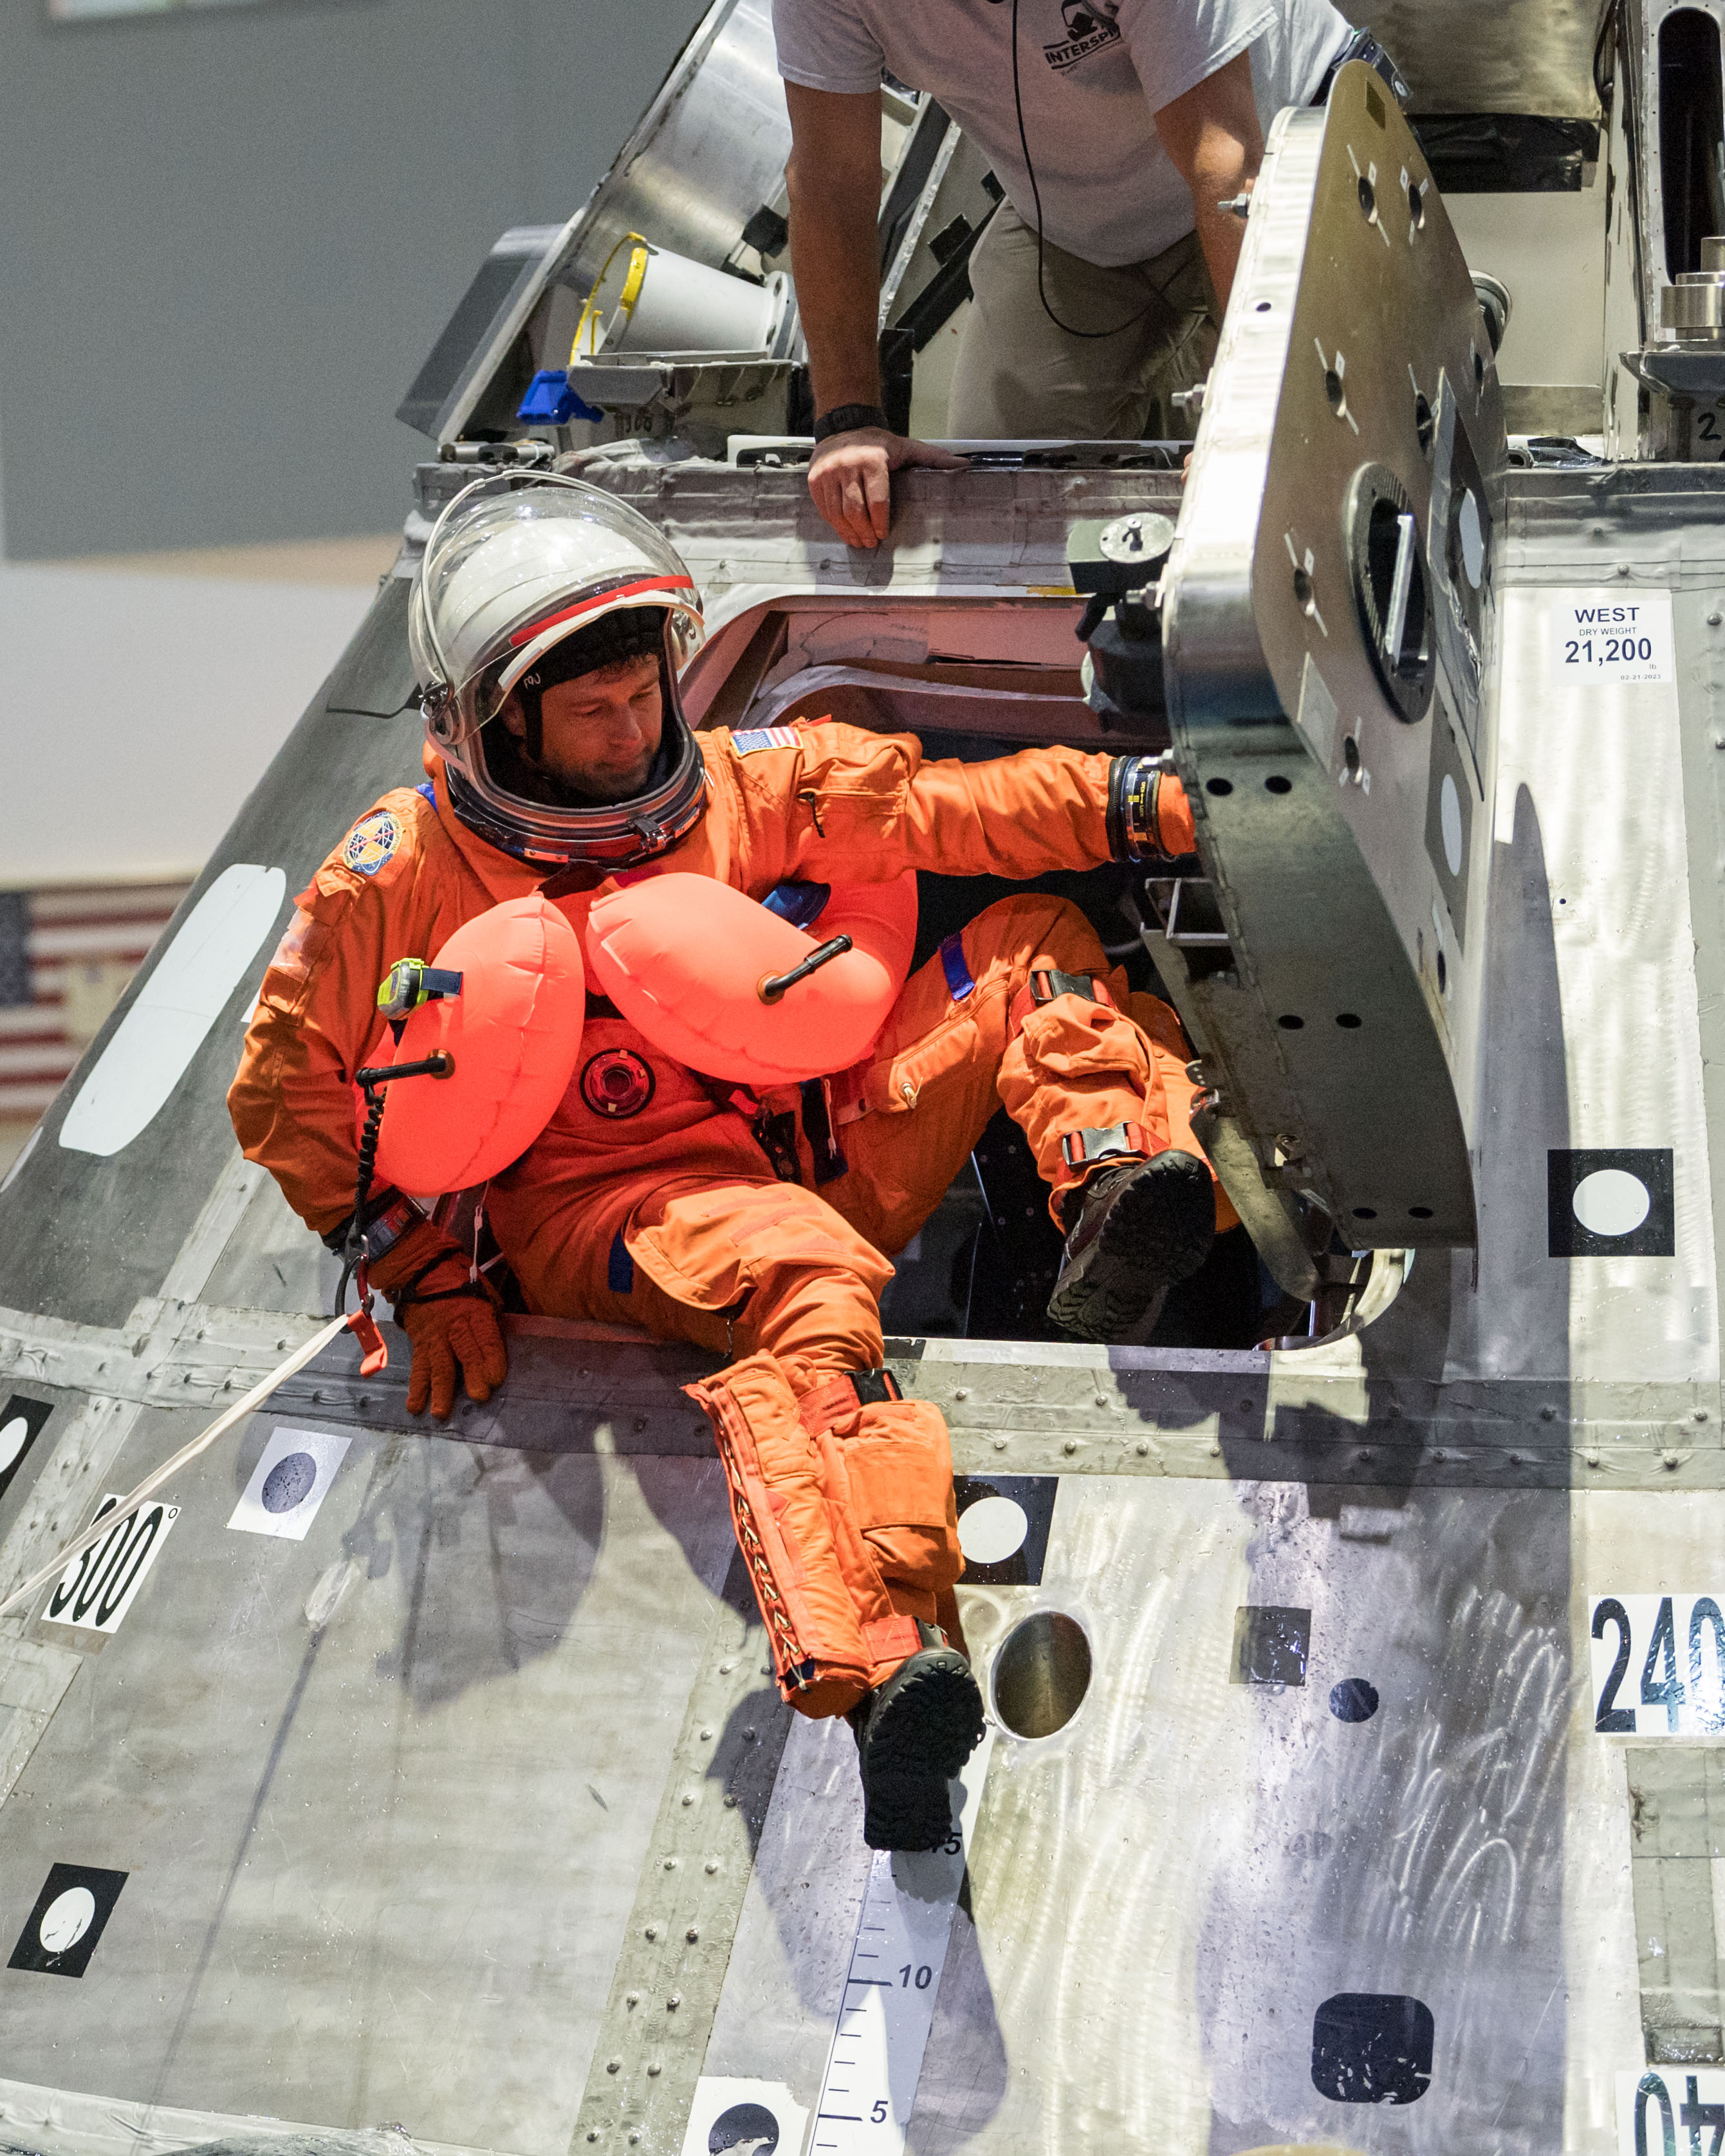 NASA astronaut and Artemis II commander Reid Wiseman exits the side of a mockup of the Orion spacecraft during a training exercise in the Neutral Buoyancy Lab at NASA’s Johnson Space Center in Houston on Jan. 23. As part of training for their mission around the Moon next year, the first crewed flight under NASA’s Artemis campaign, the crew of four astronauts practiced the recovery procedures they will use when the splash down in the Pacific Ocean.